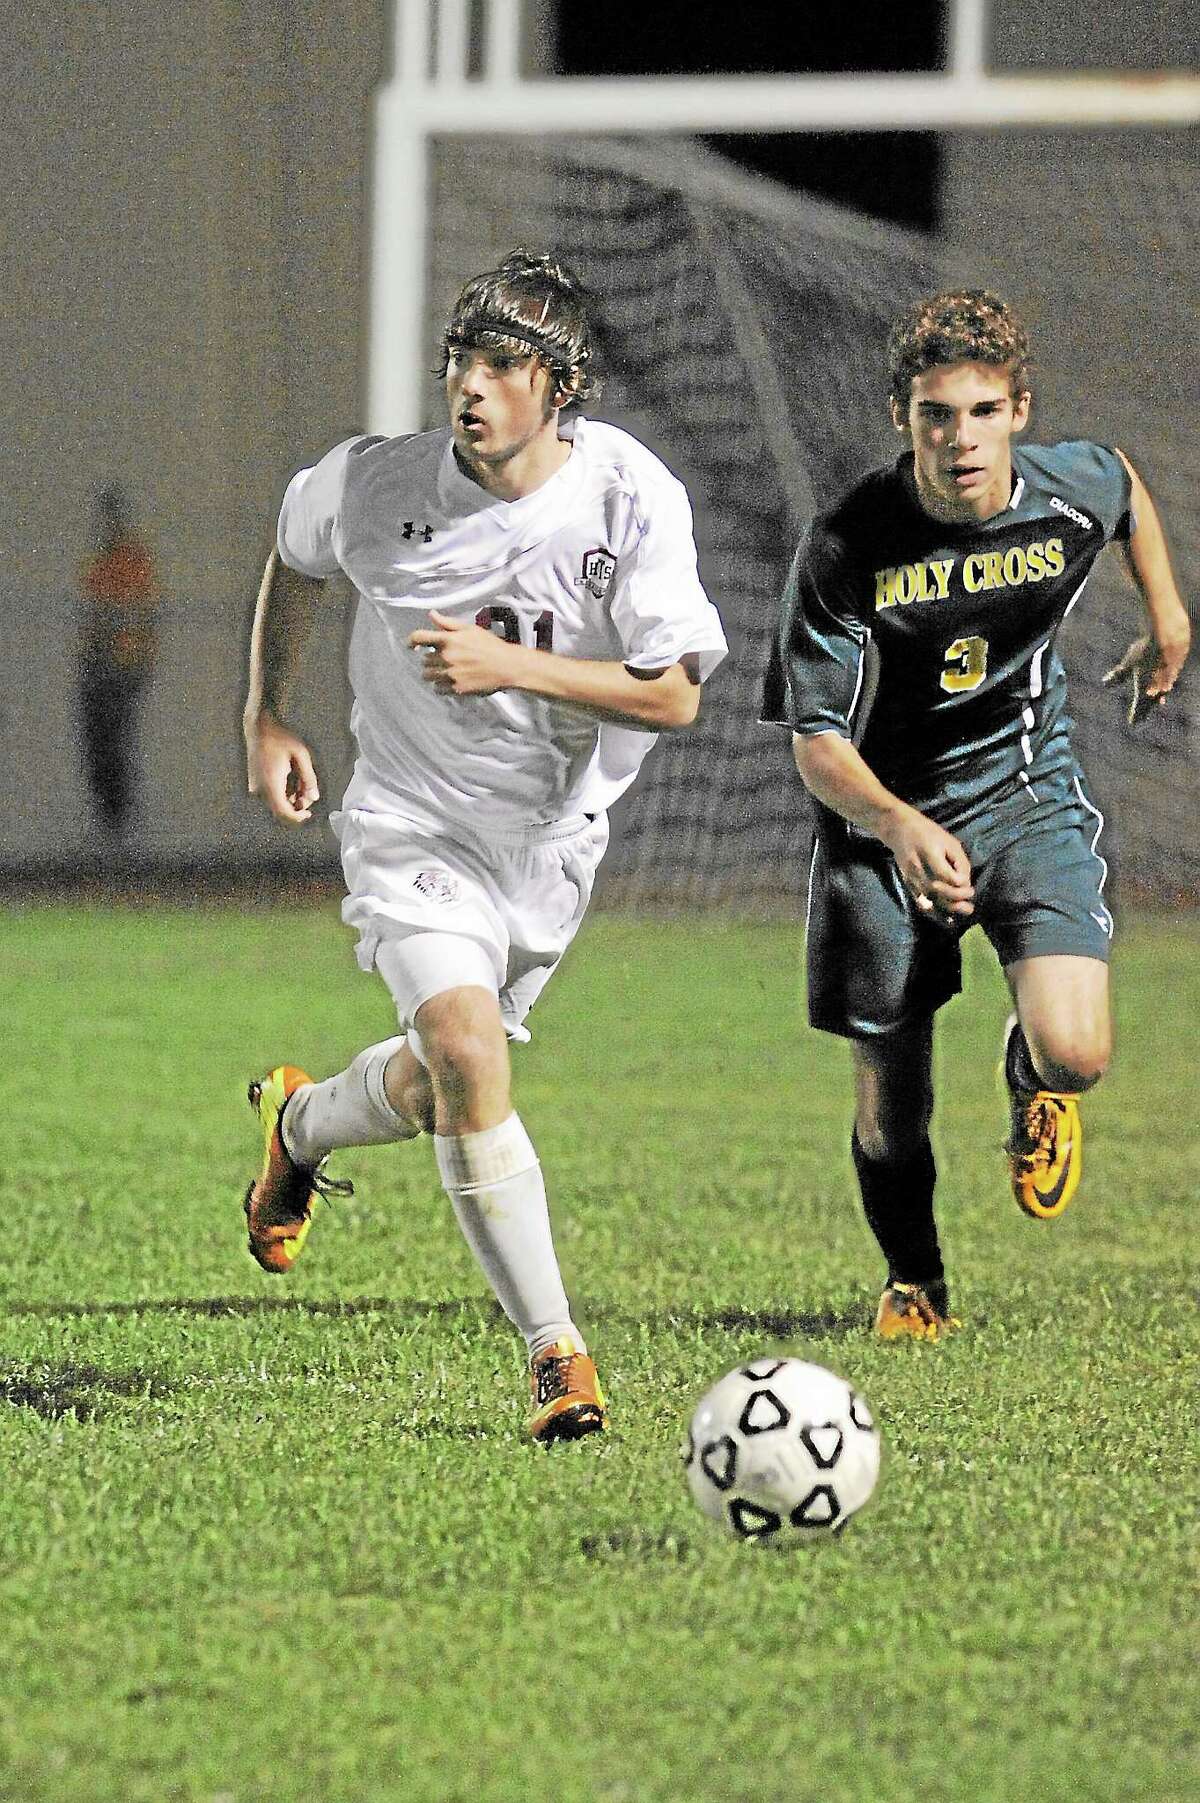 Torrington’s Shane Walker looks to make a pass during the Red Raiders 3-1 win over Holy Cross. Walker scored the second and eventual game-winning goal.